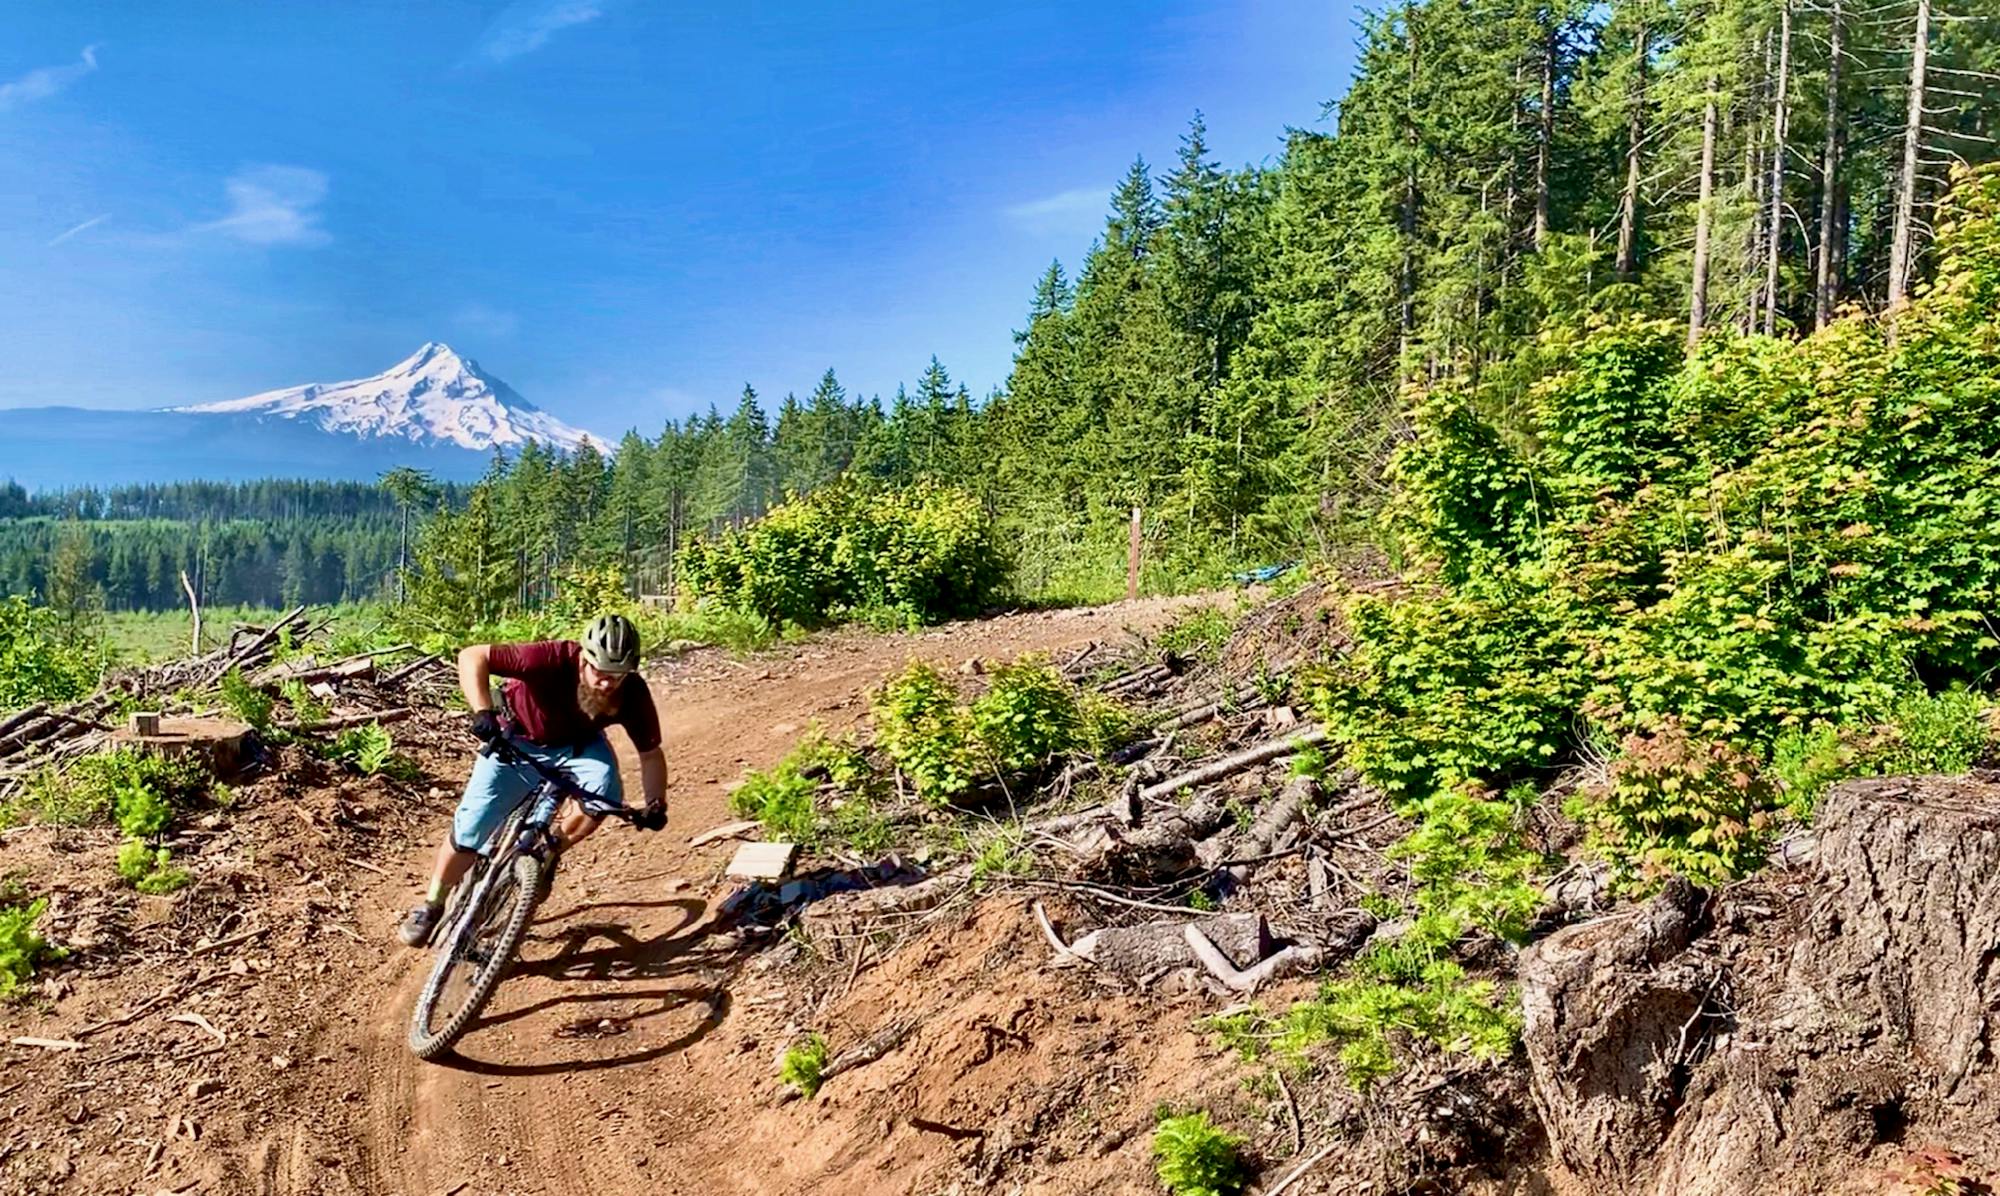 Greg riding with Mount Hood in the background